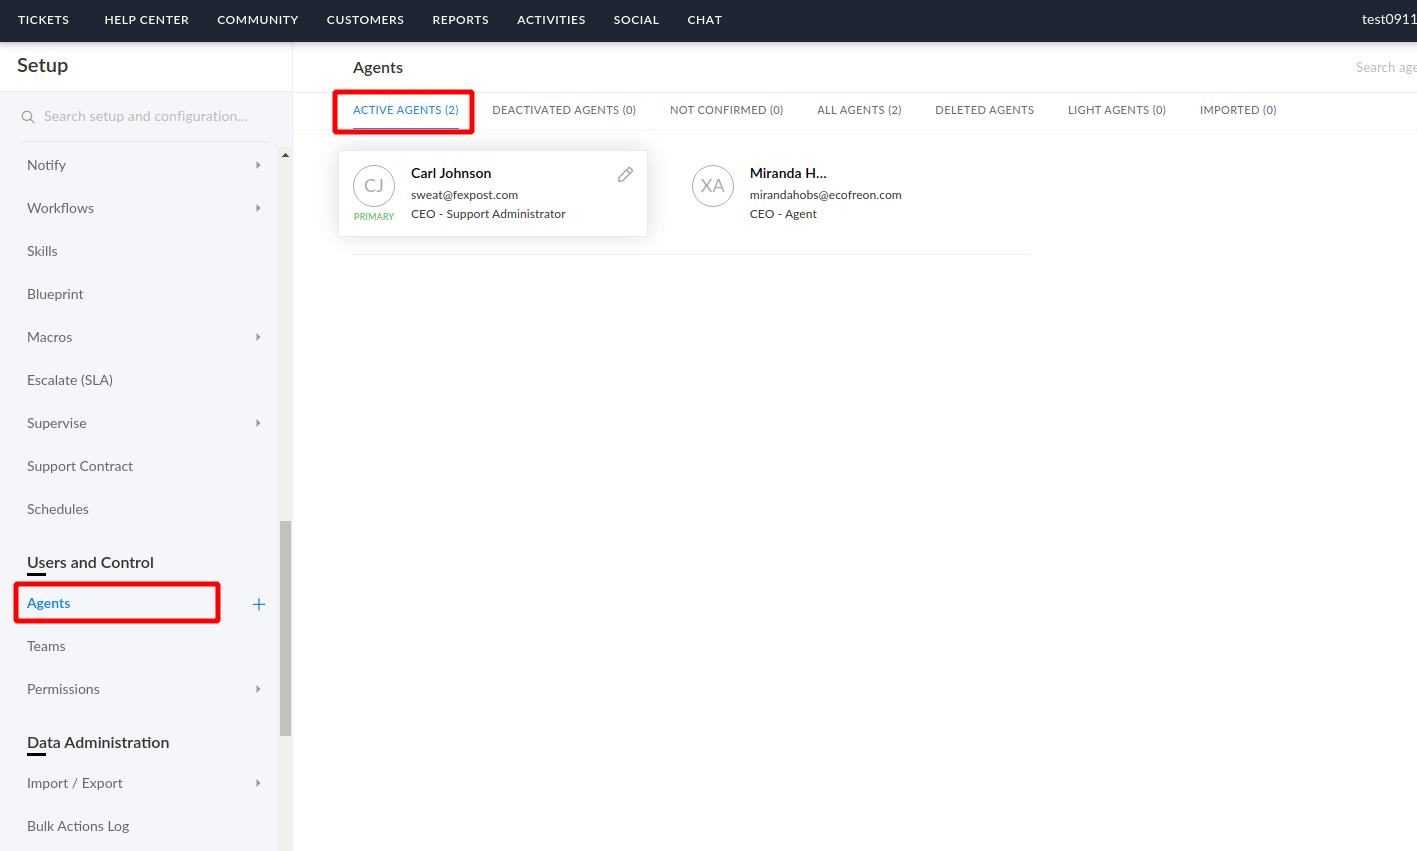 Migrate Agents in Zoho Desk